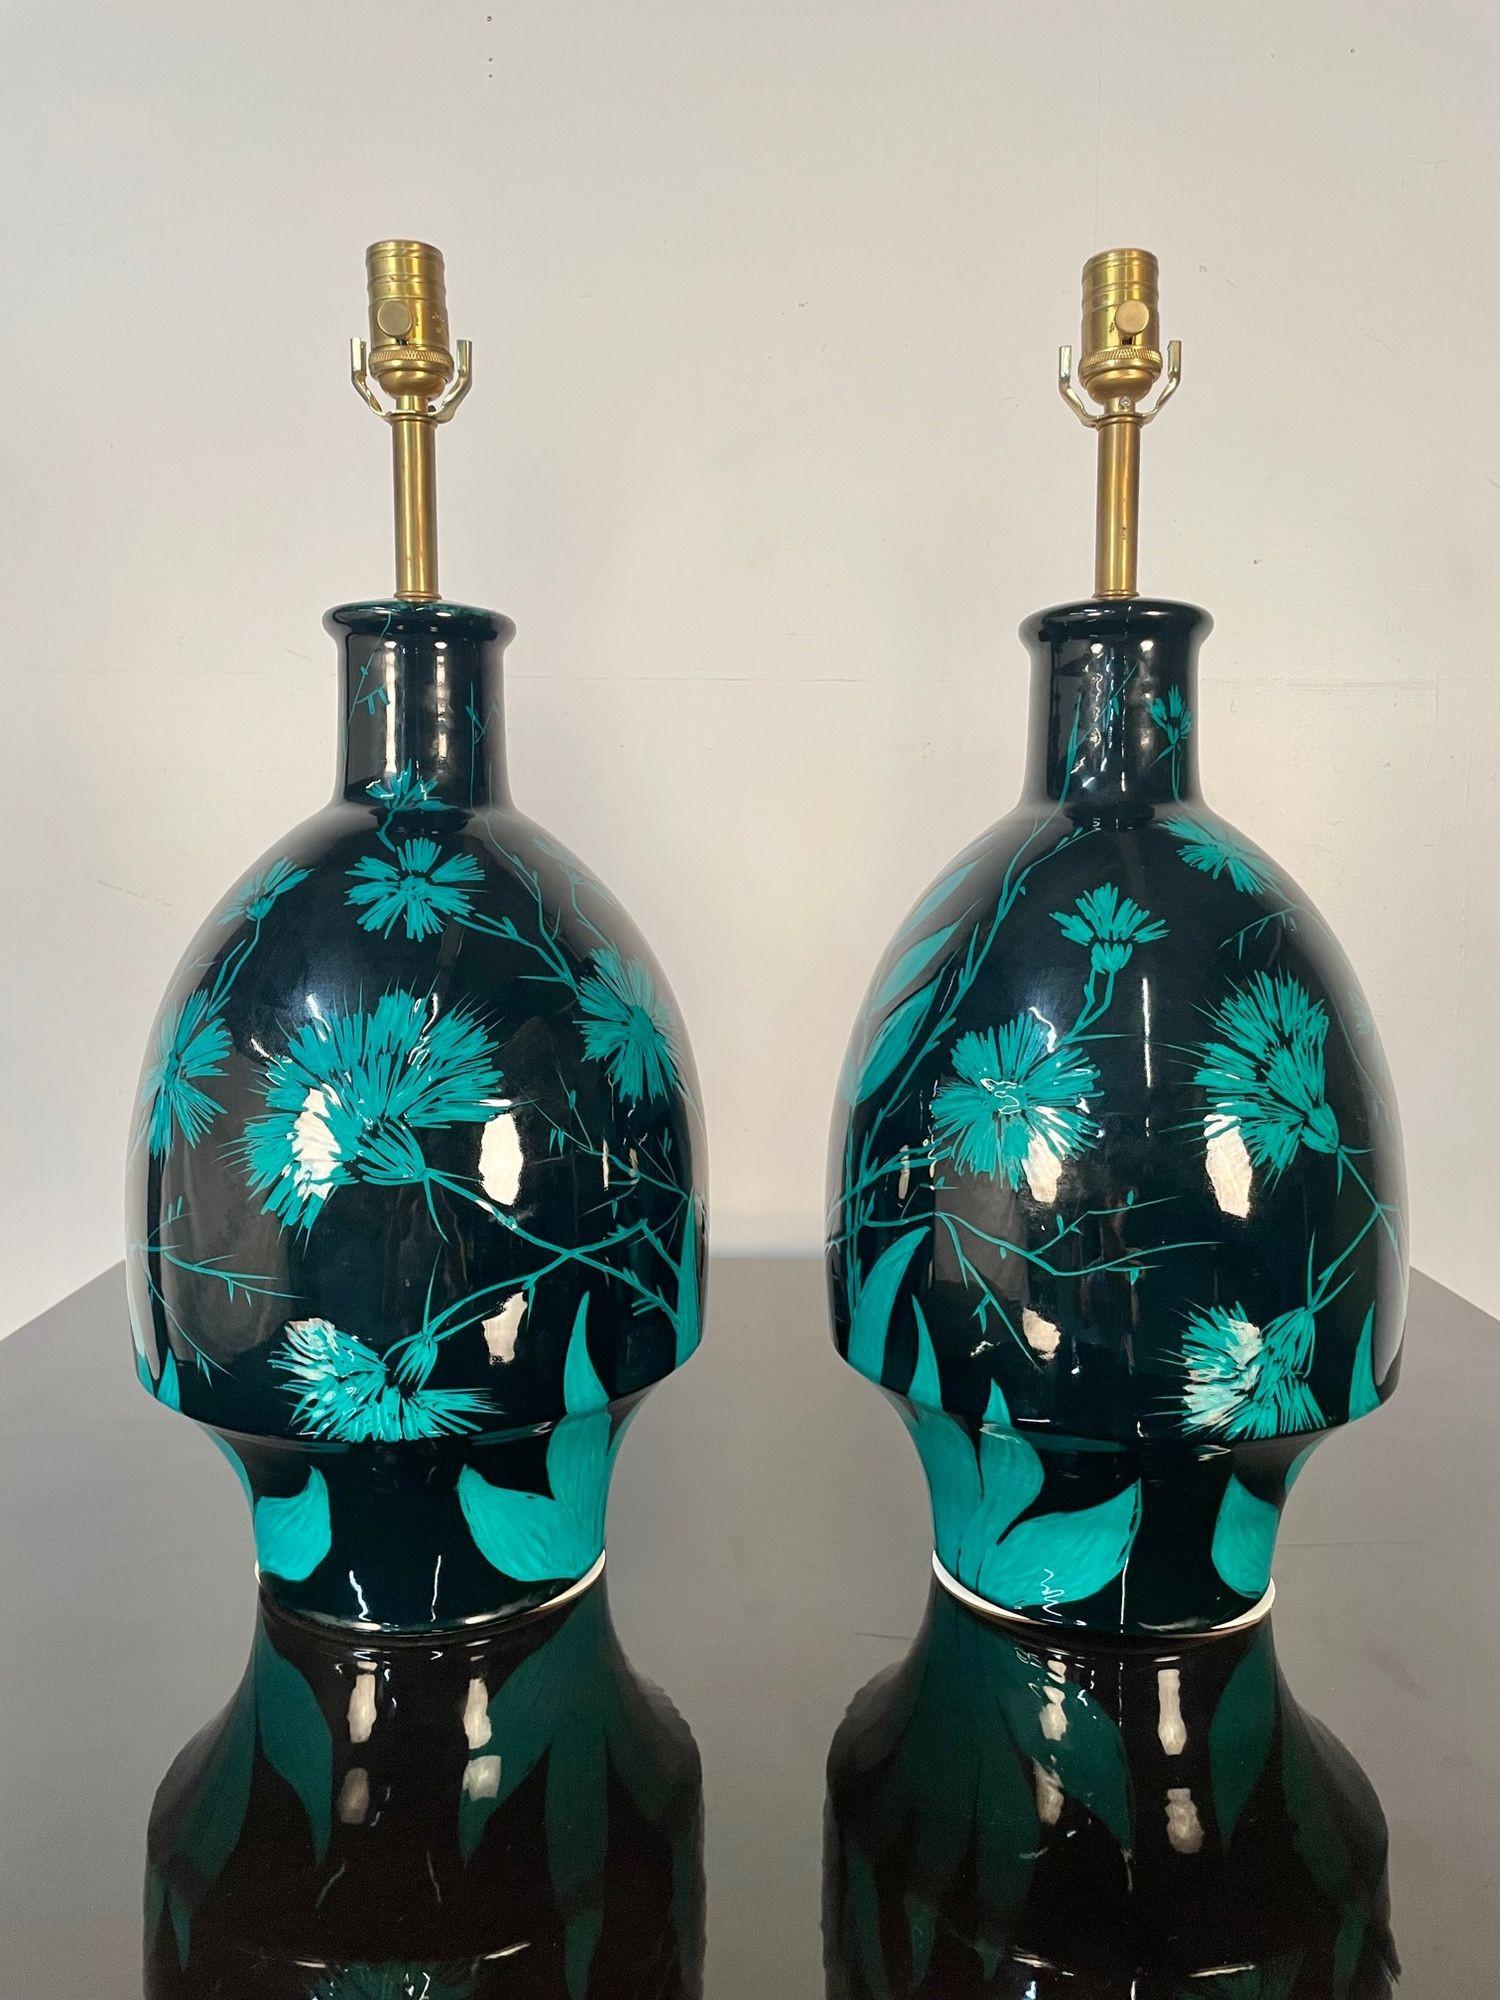 Pair of Mid-Century Modern Ceramic Floral Motif Table Lamps, Green and Blue In Good Condition For Sale In Stamford, CT